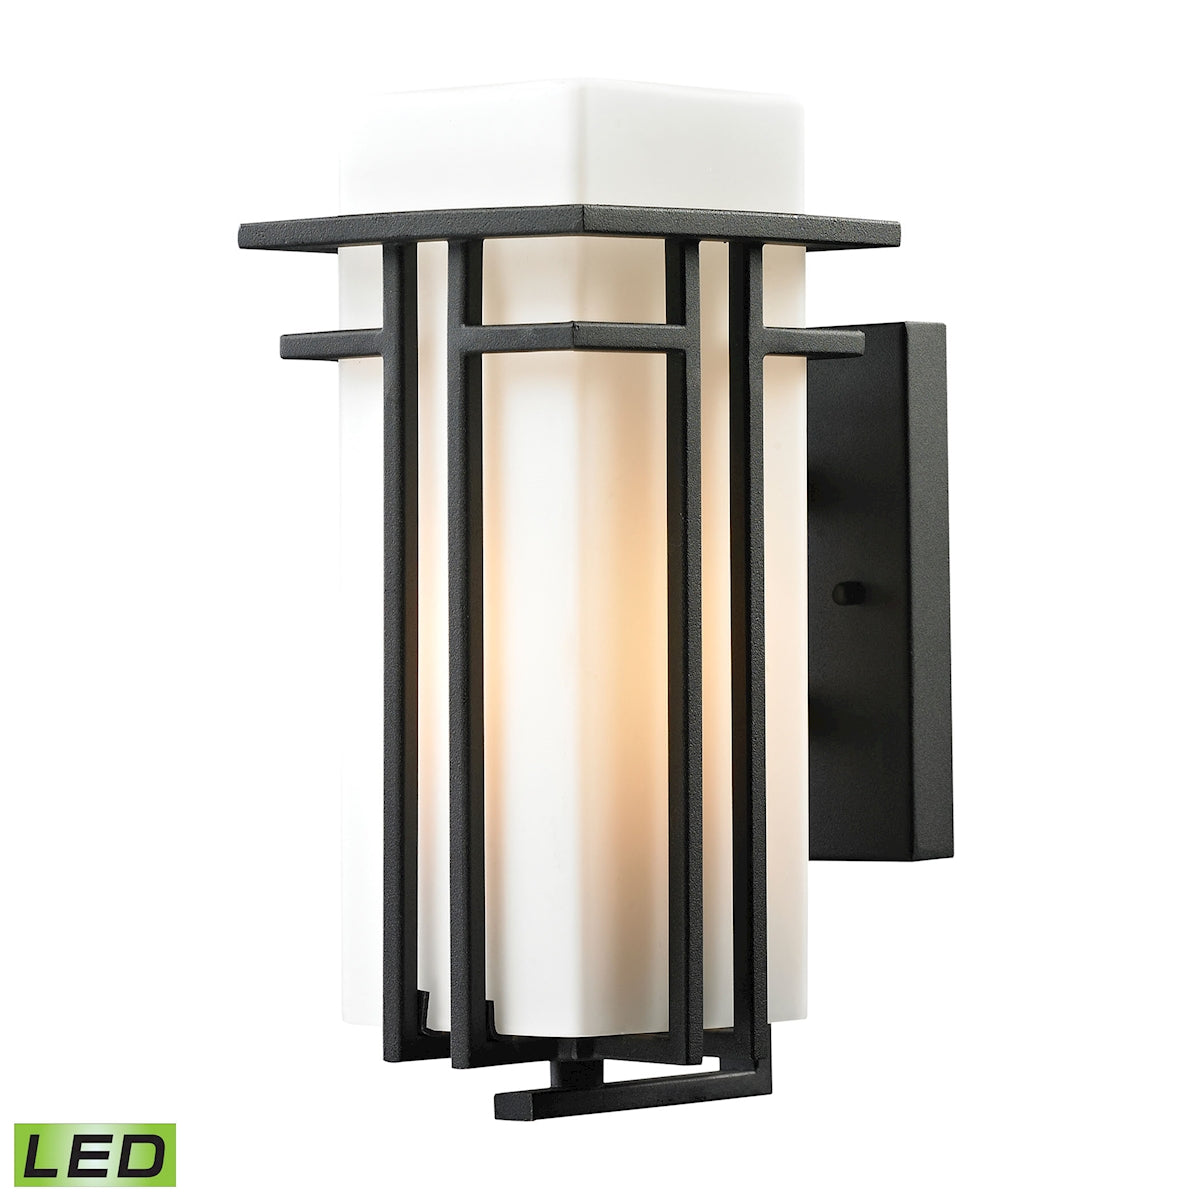 ELK Lighting 45085/1-LED Croftwell 1-Light Outdoor Wall Lamp in Textured Matte Black - Includes LED Bulb